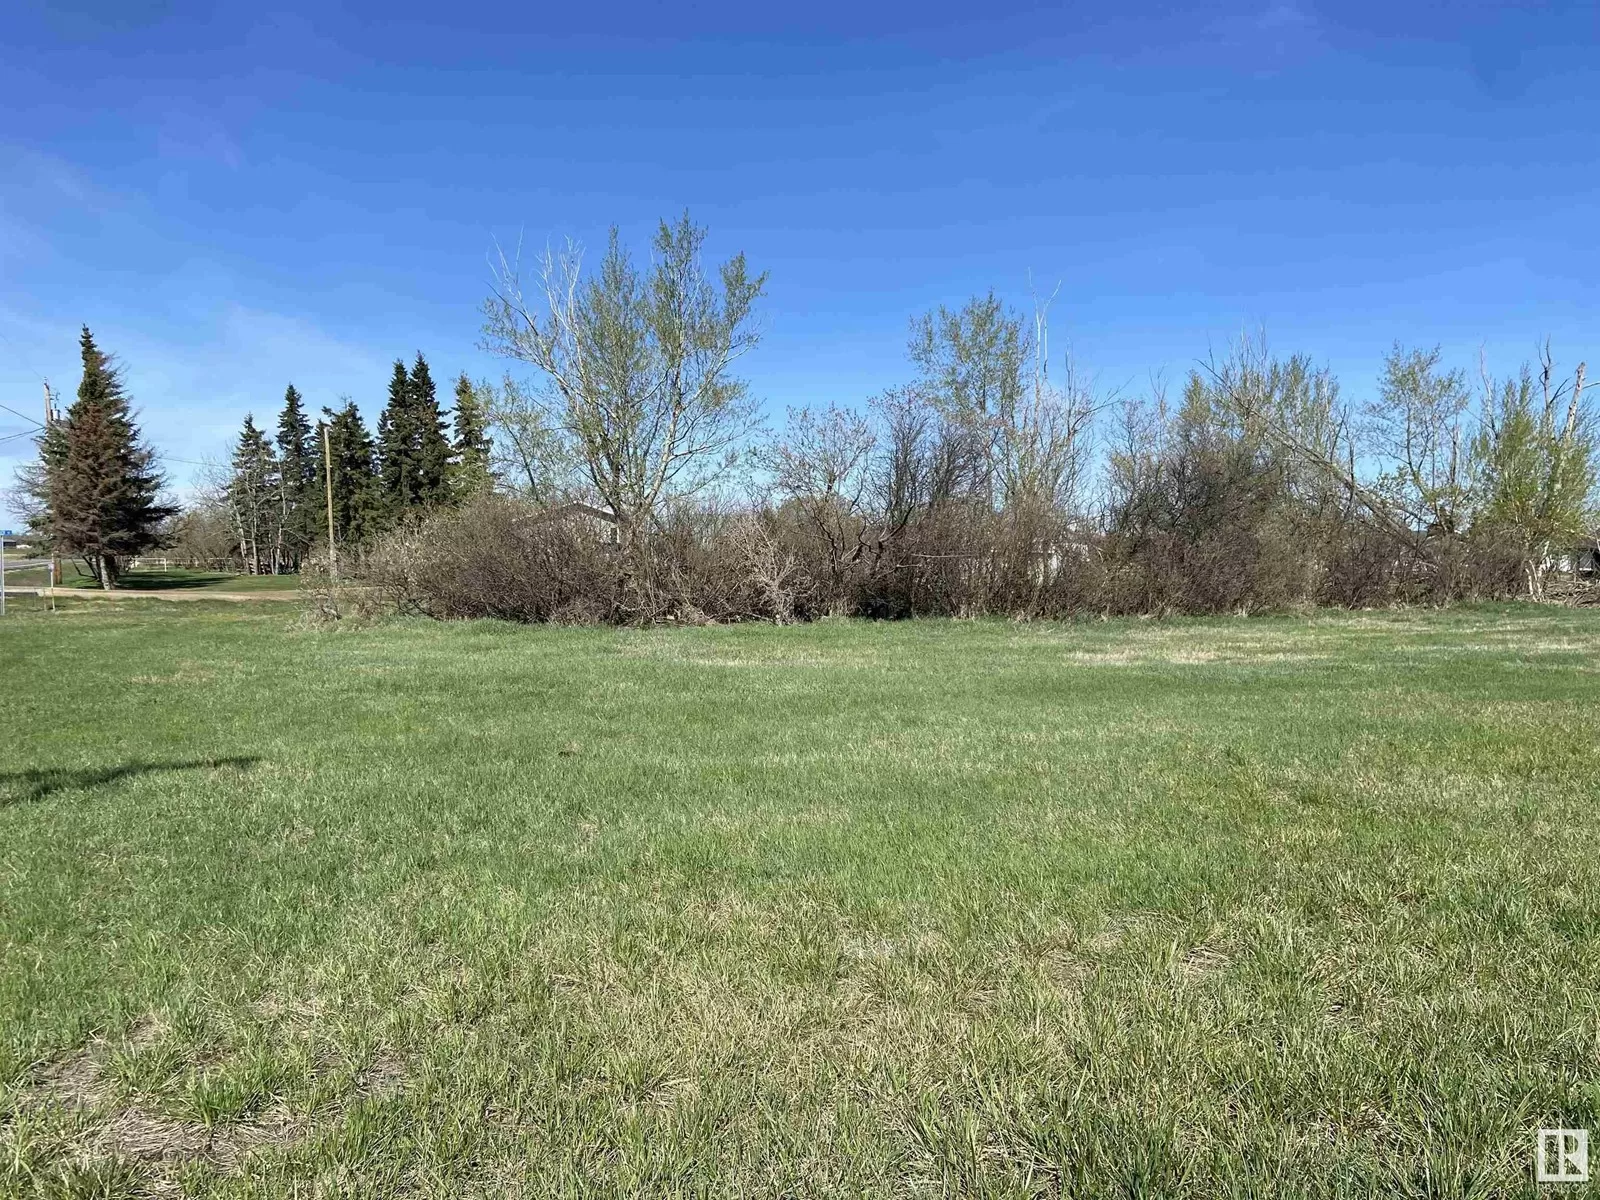 No Building for rent: #234 26500 Hwy 44, Riviere Qui Barre, Alberta T8R 0J3